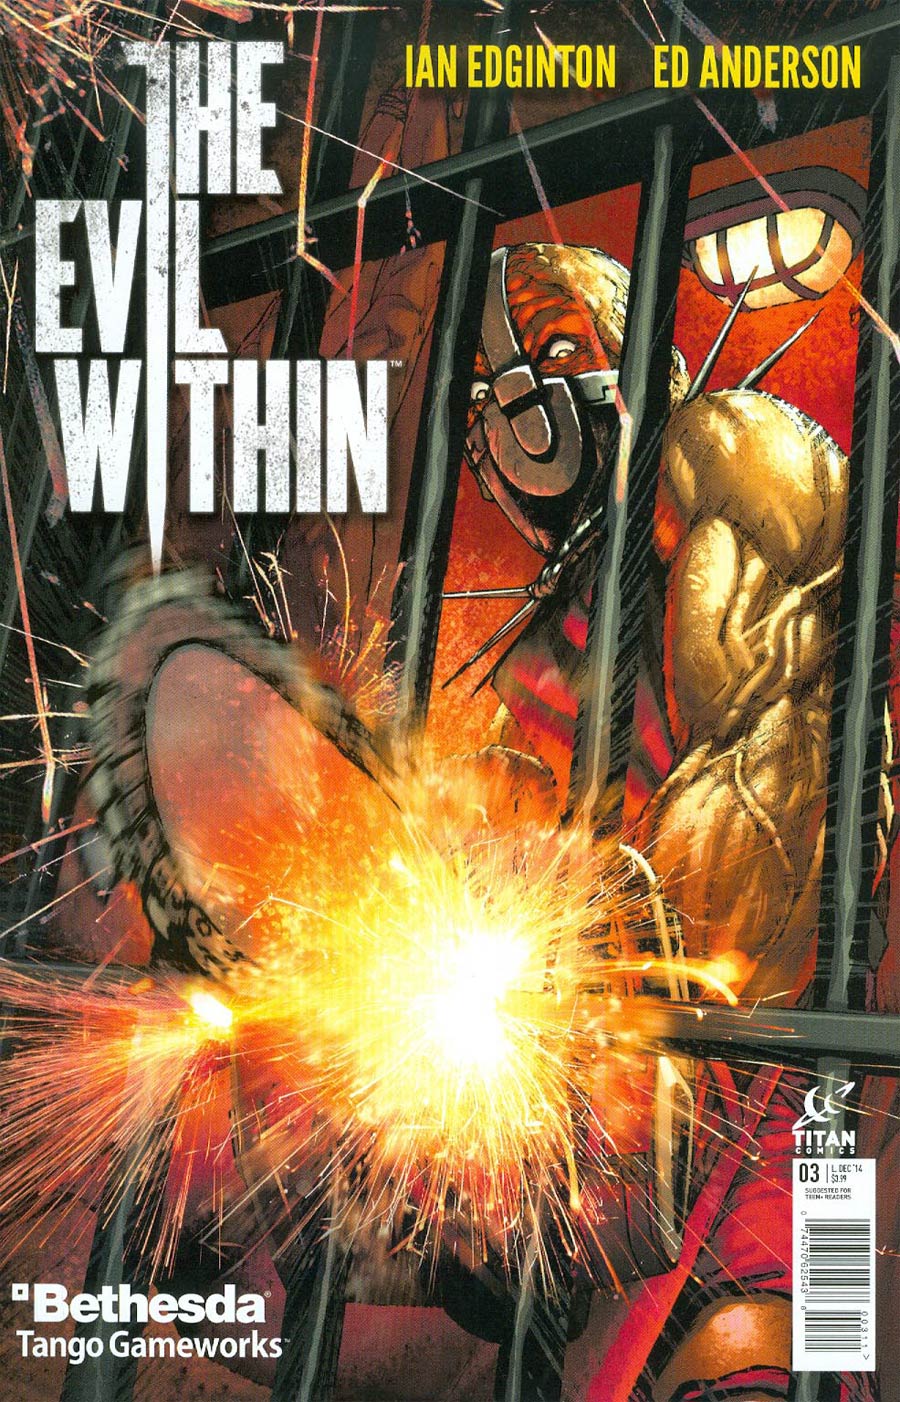 Evil Within #3